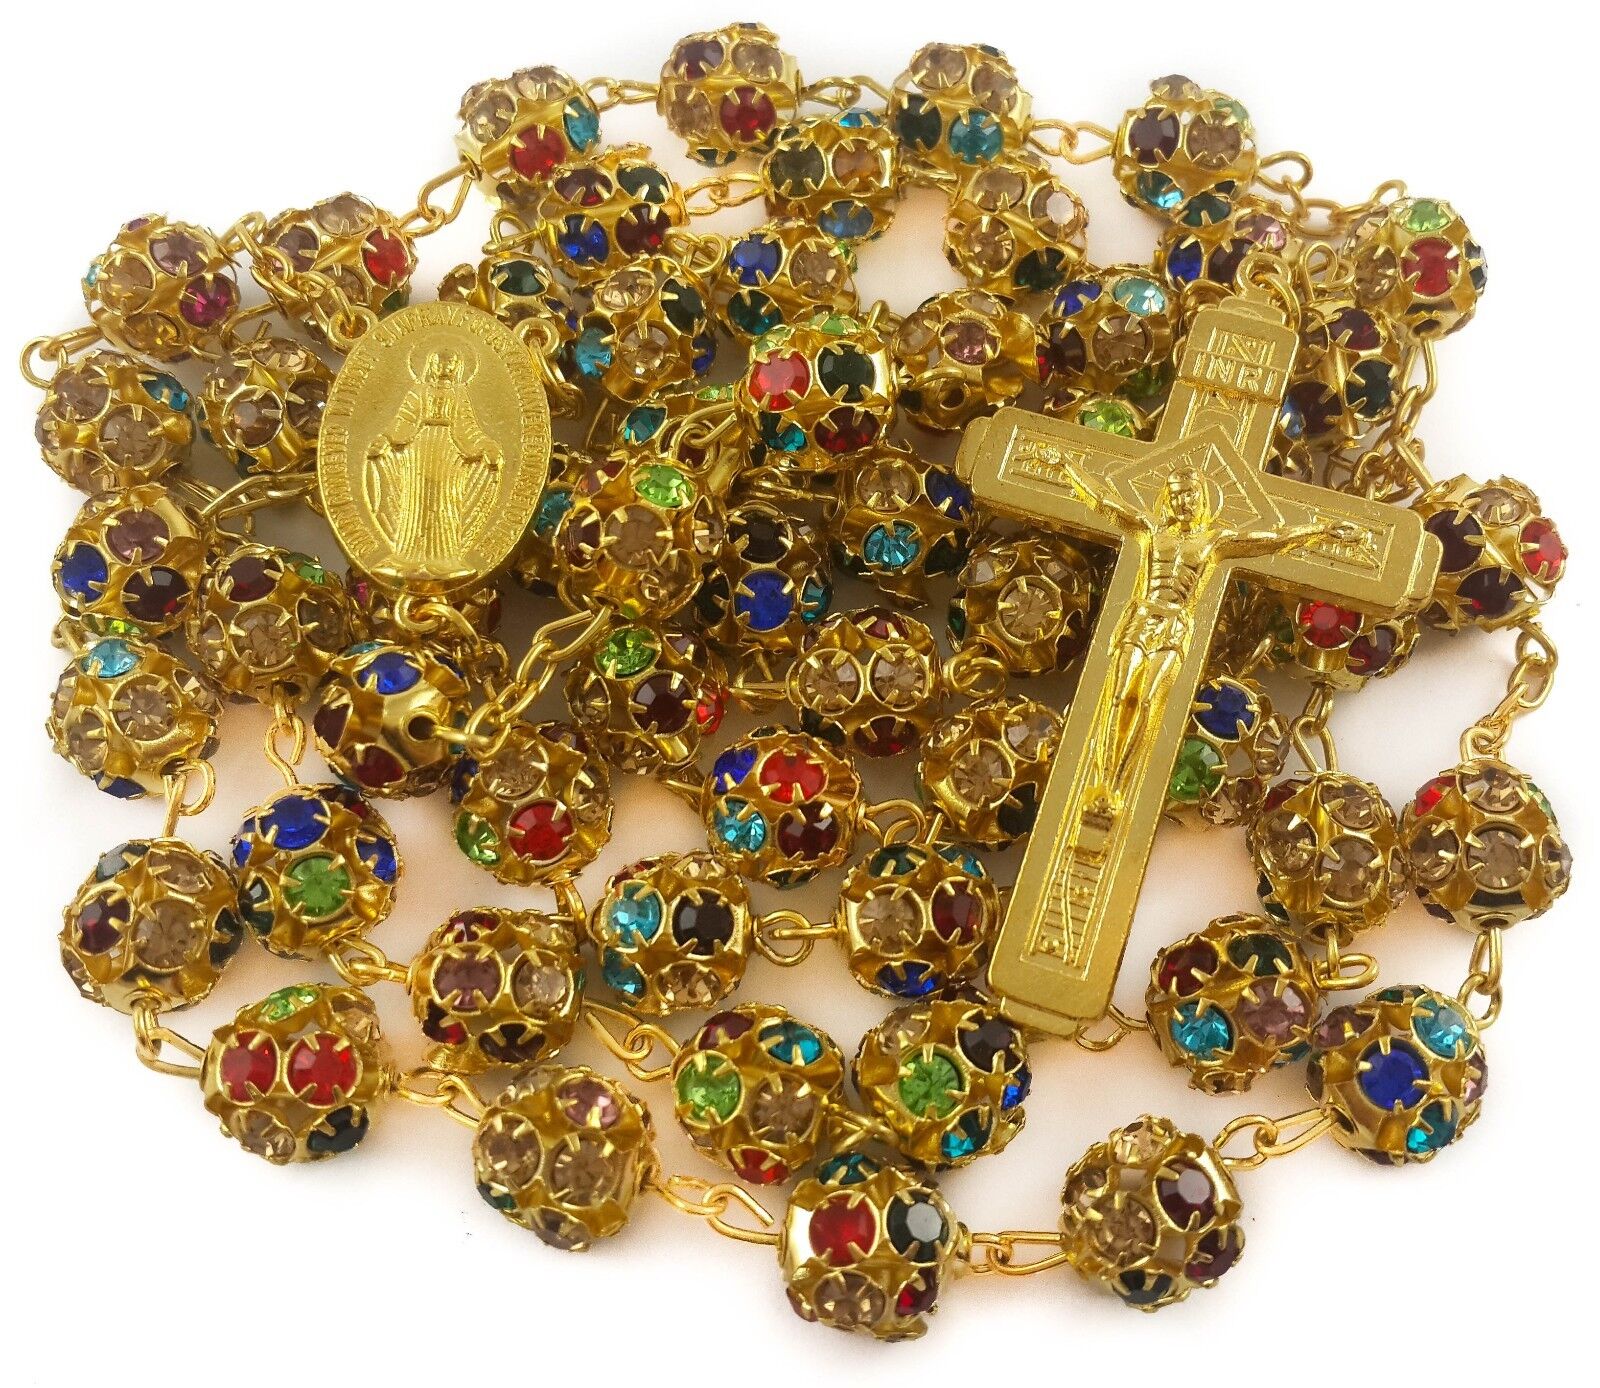 Colorful Zircon Beads Golden Rosary Catholic Necklace Miraculous Medal Cross